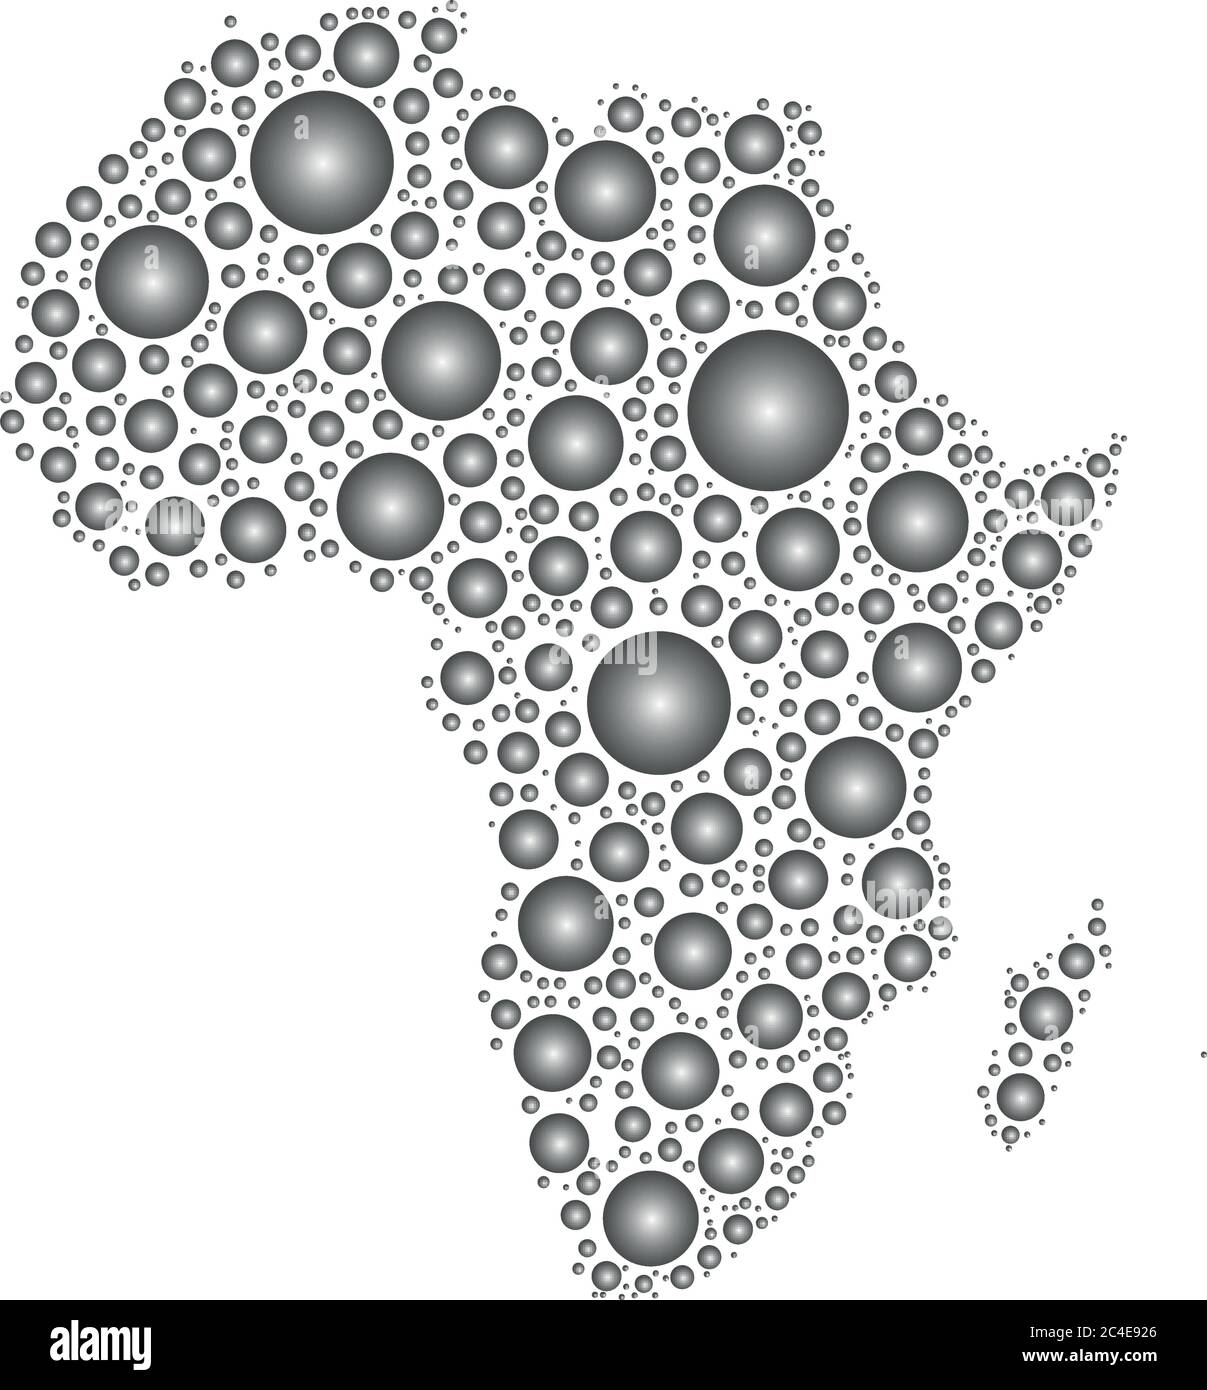 Silhouette of Africa continent. Mosaic of grey rounded rain drops on white background. Vector map illustration. Stock Vector